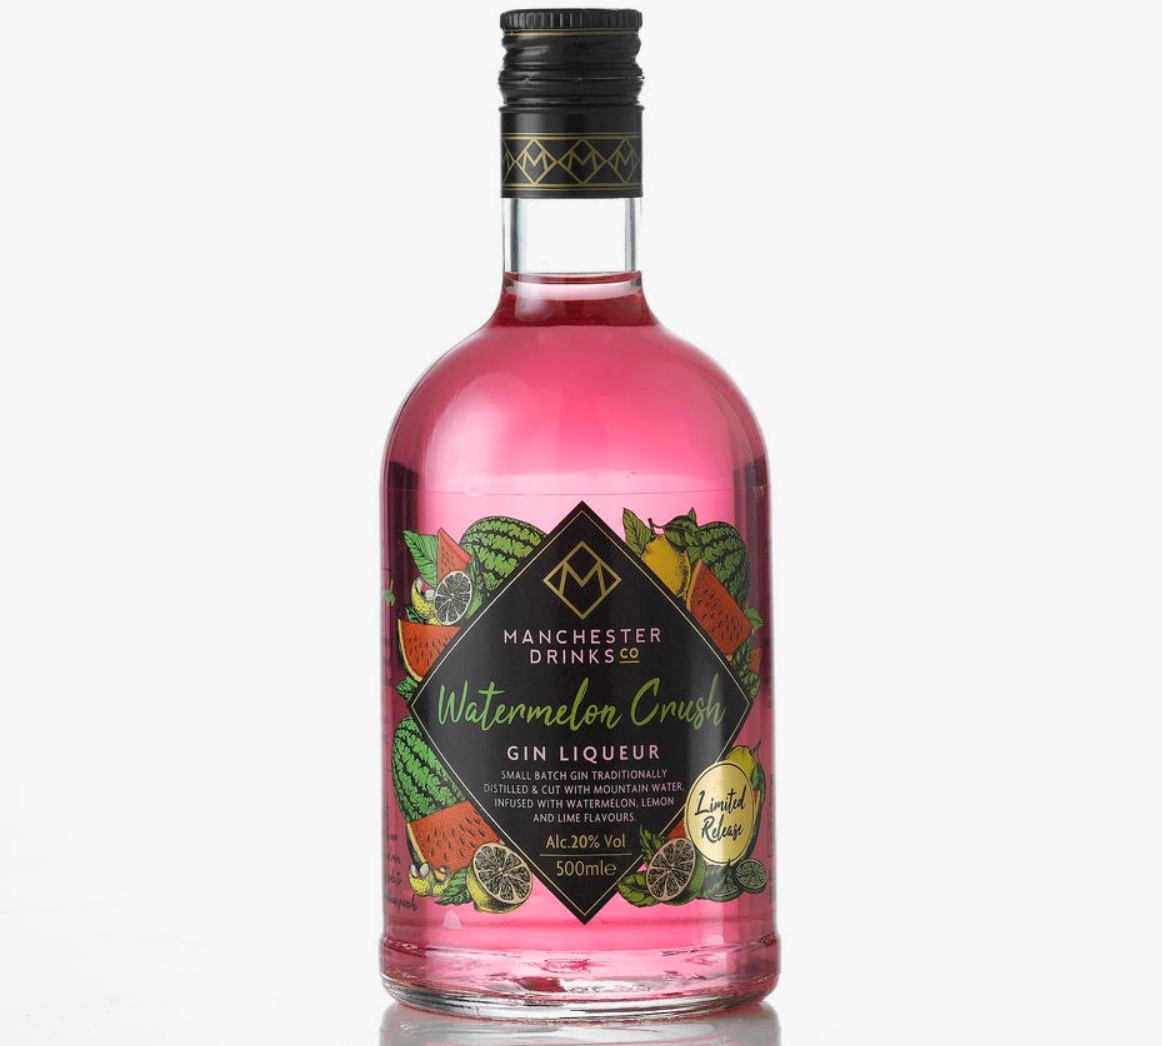 Manchester Drinks launches new Watermelon Gin Liqueur and it&#8217;s on shelves at Home Bargains now, The Manc